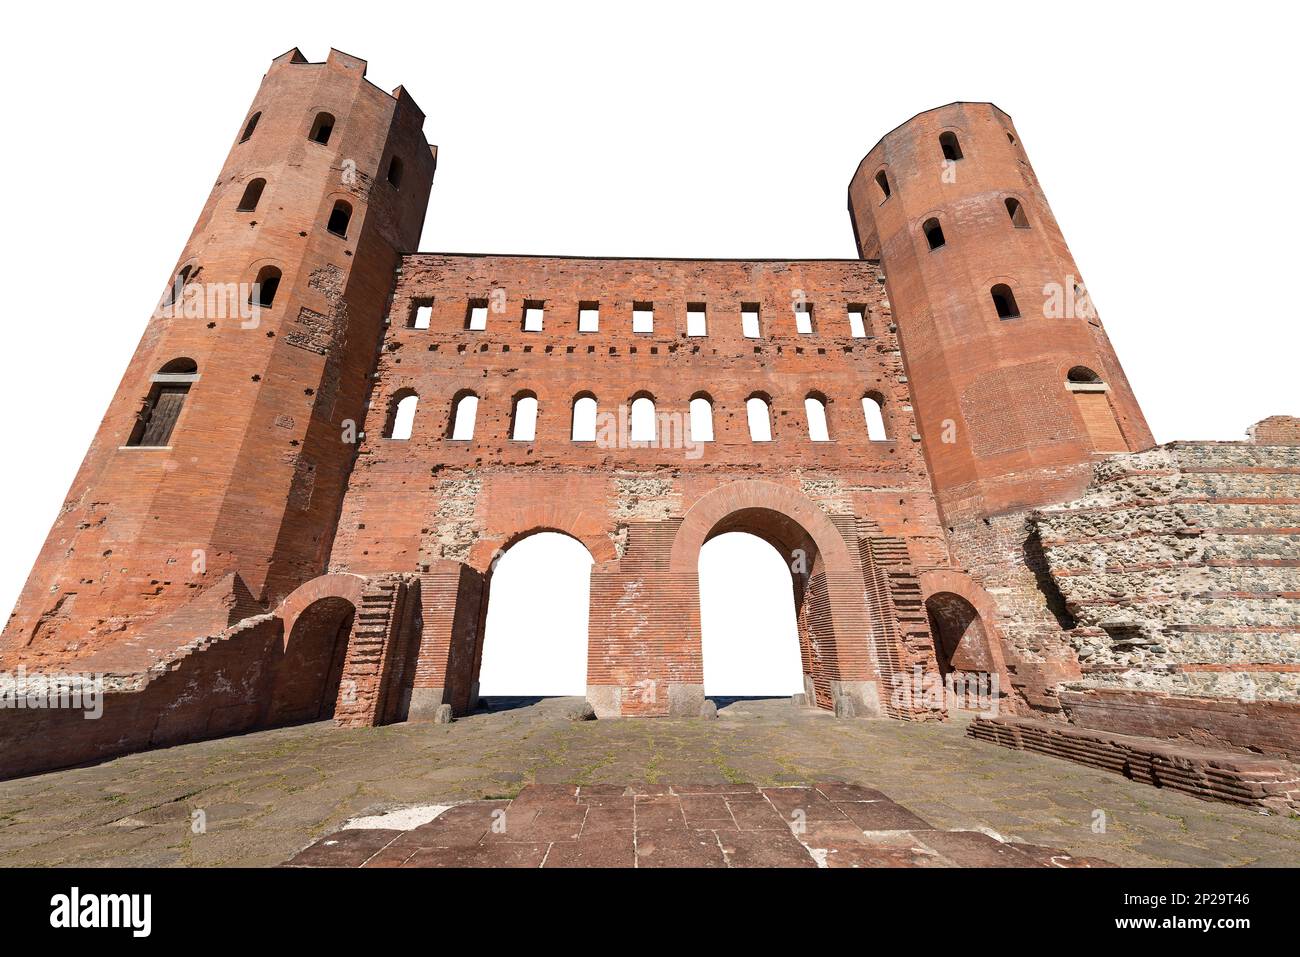 Ancient Roman ruins of Palatine gate and towers (Porta Palatina), isolated on white background, Turin downtown (Torino), Piedmont, Italy, Europe. Stock Photo